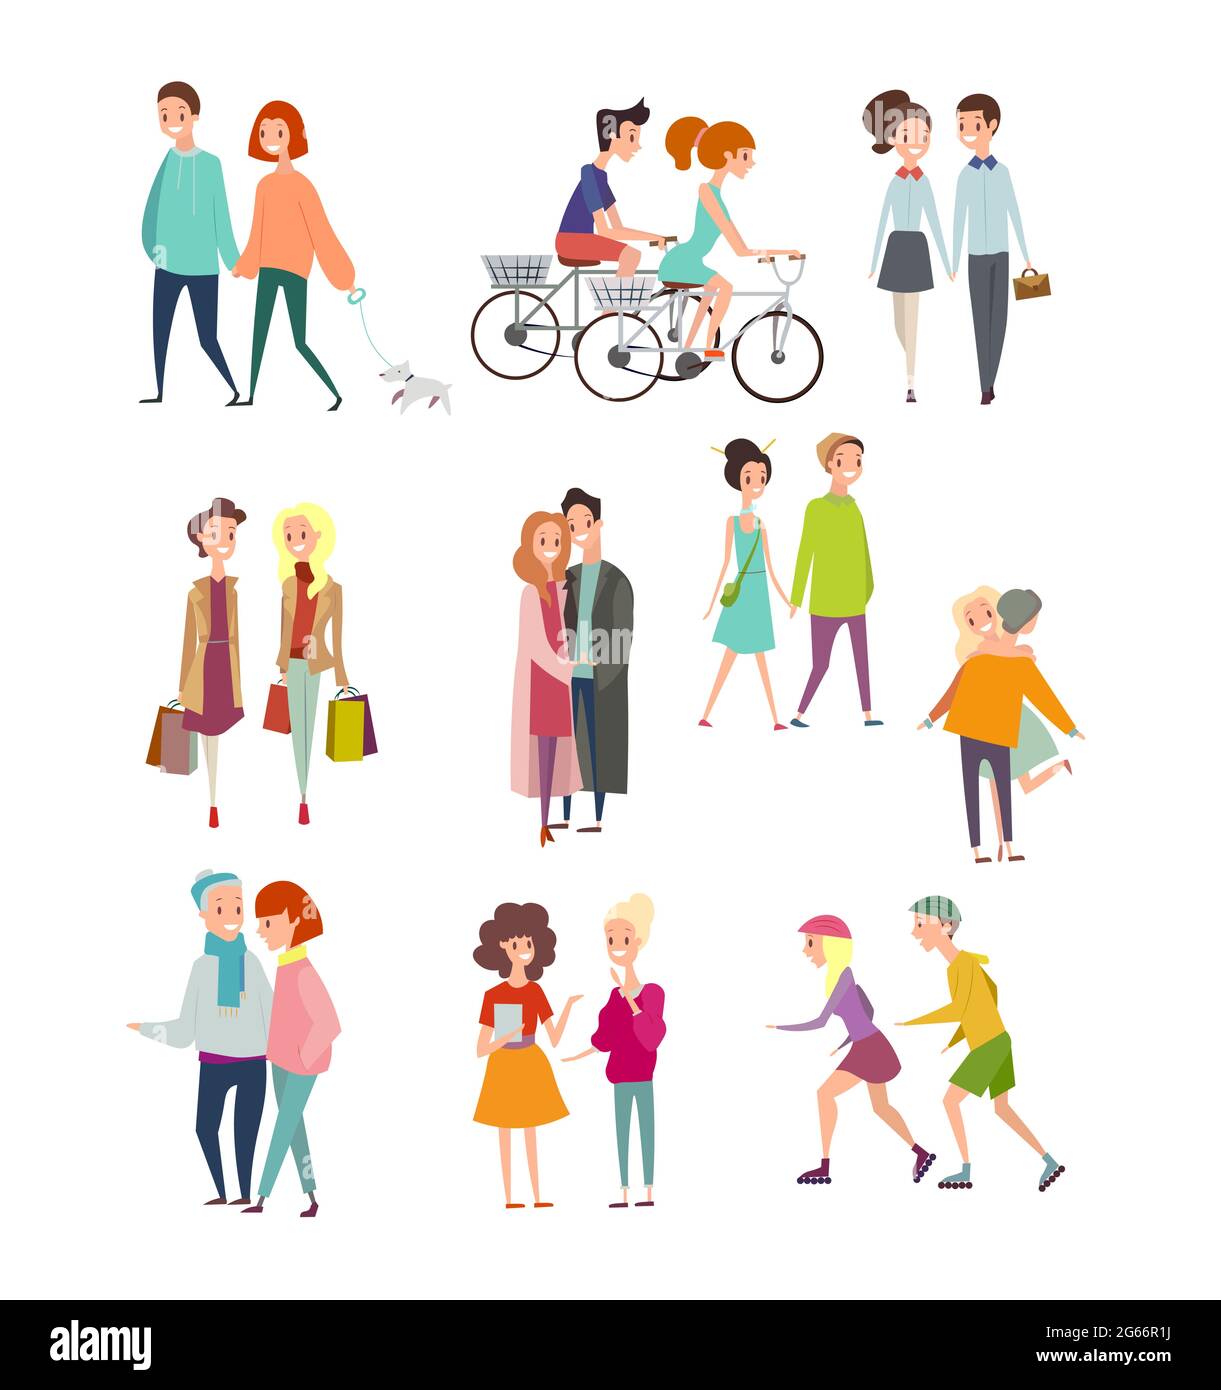 Vector illustration big set of walking and standing people, happy friends, hugging couples, people riding bicycles, walking together or pairs of men Stock Vector